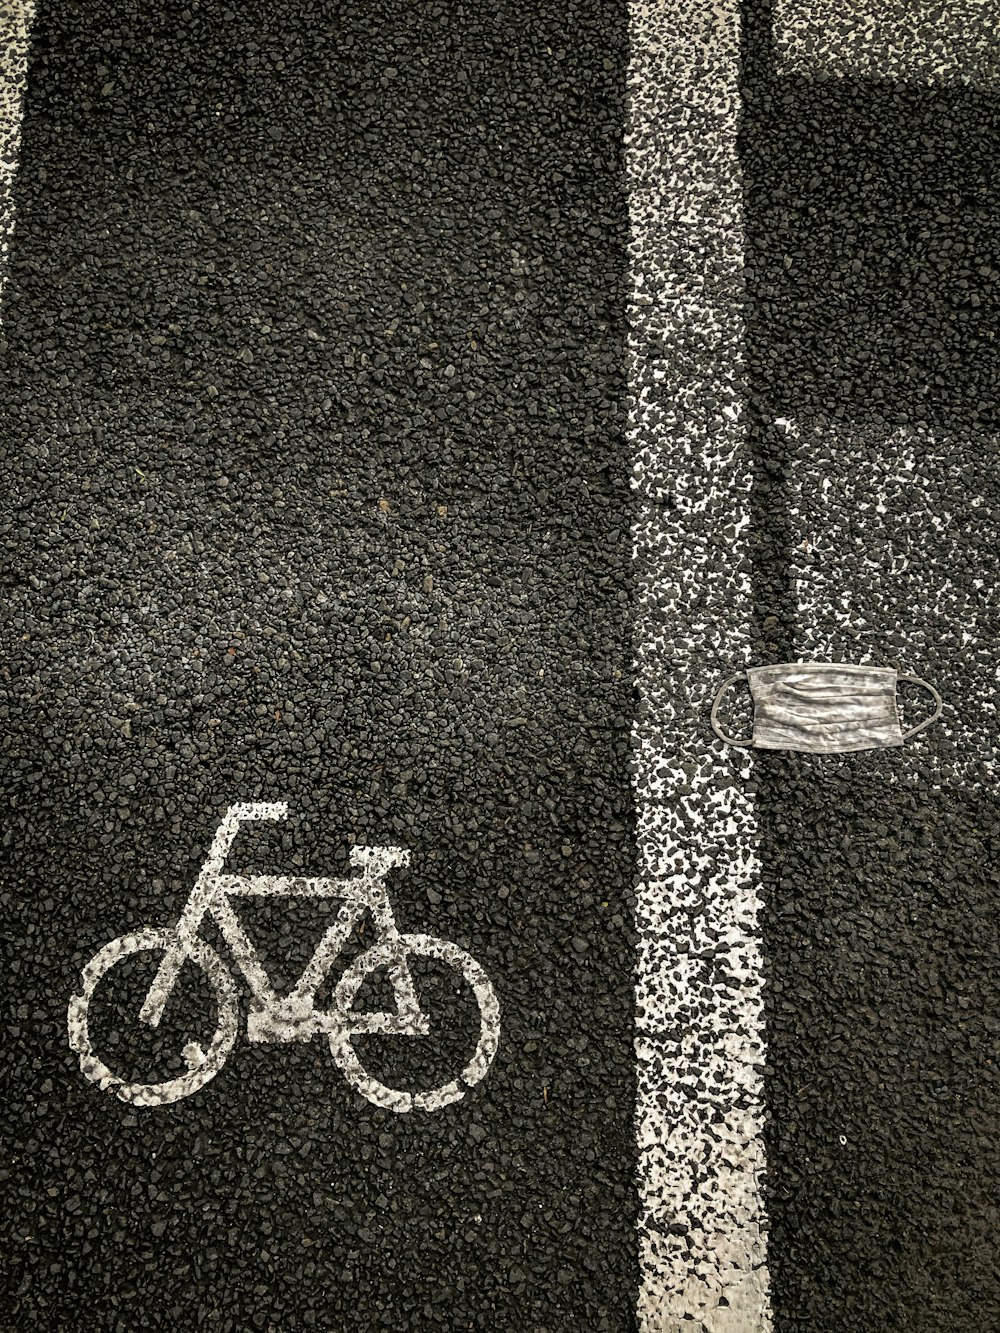 a bicycle painted on the ground in a parking lot